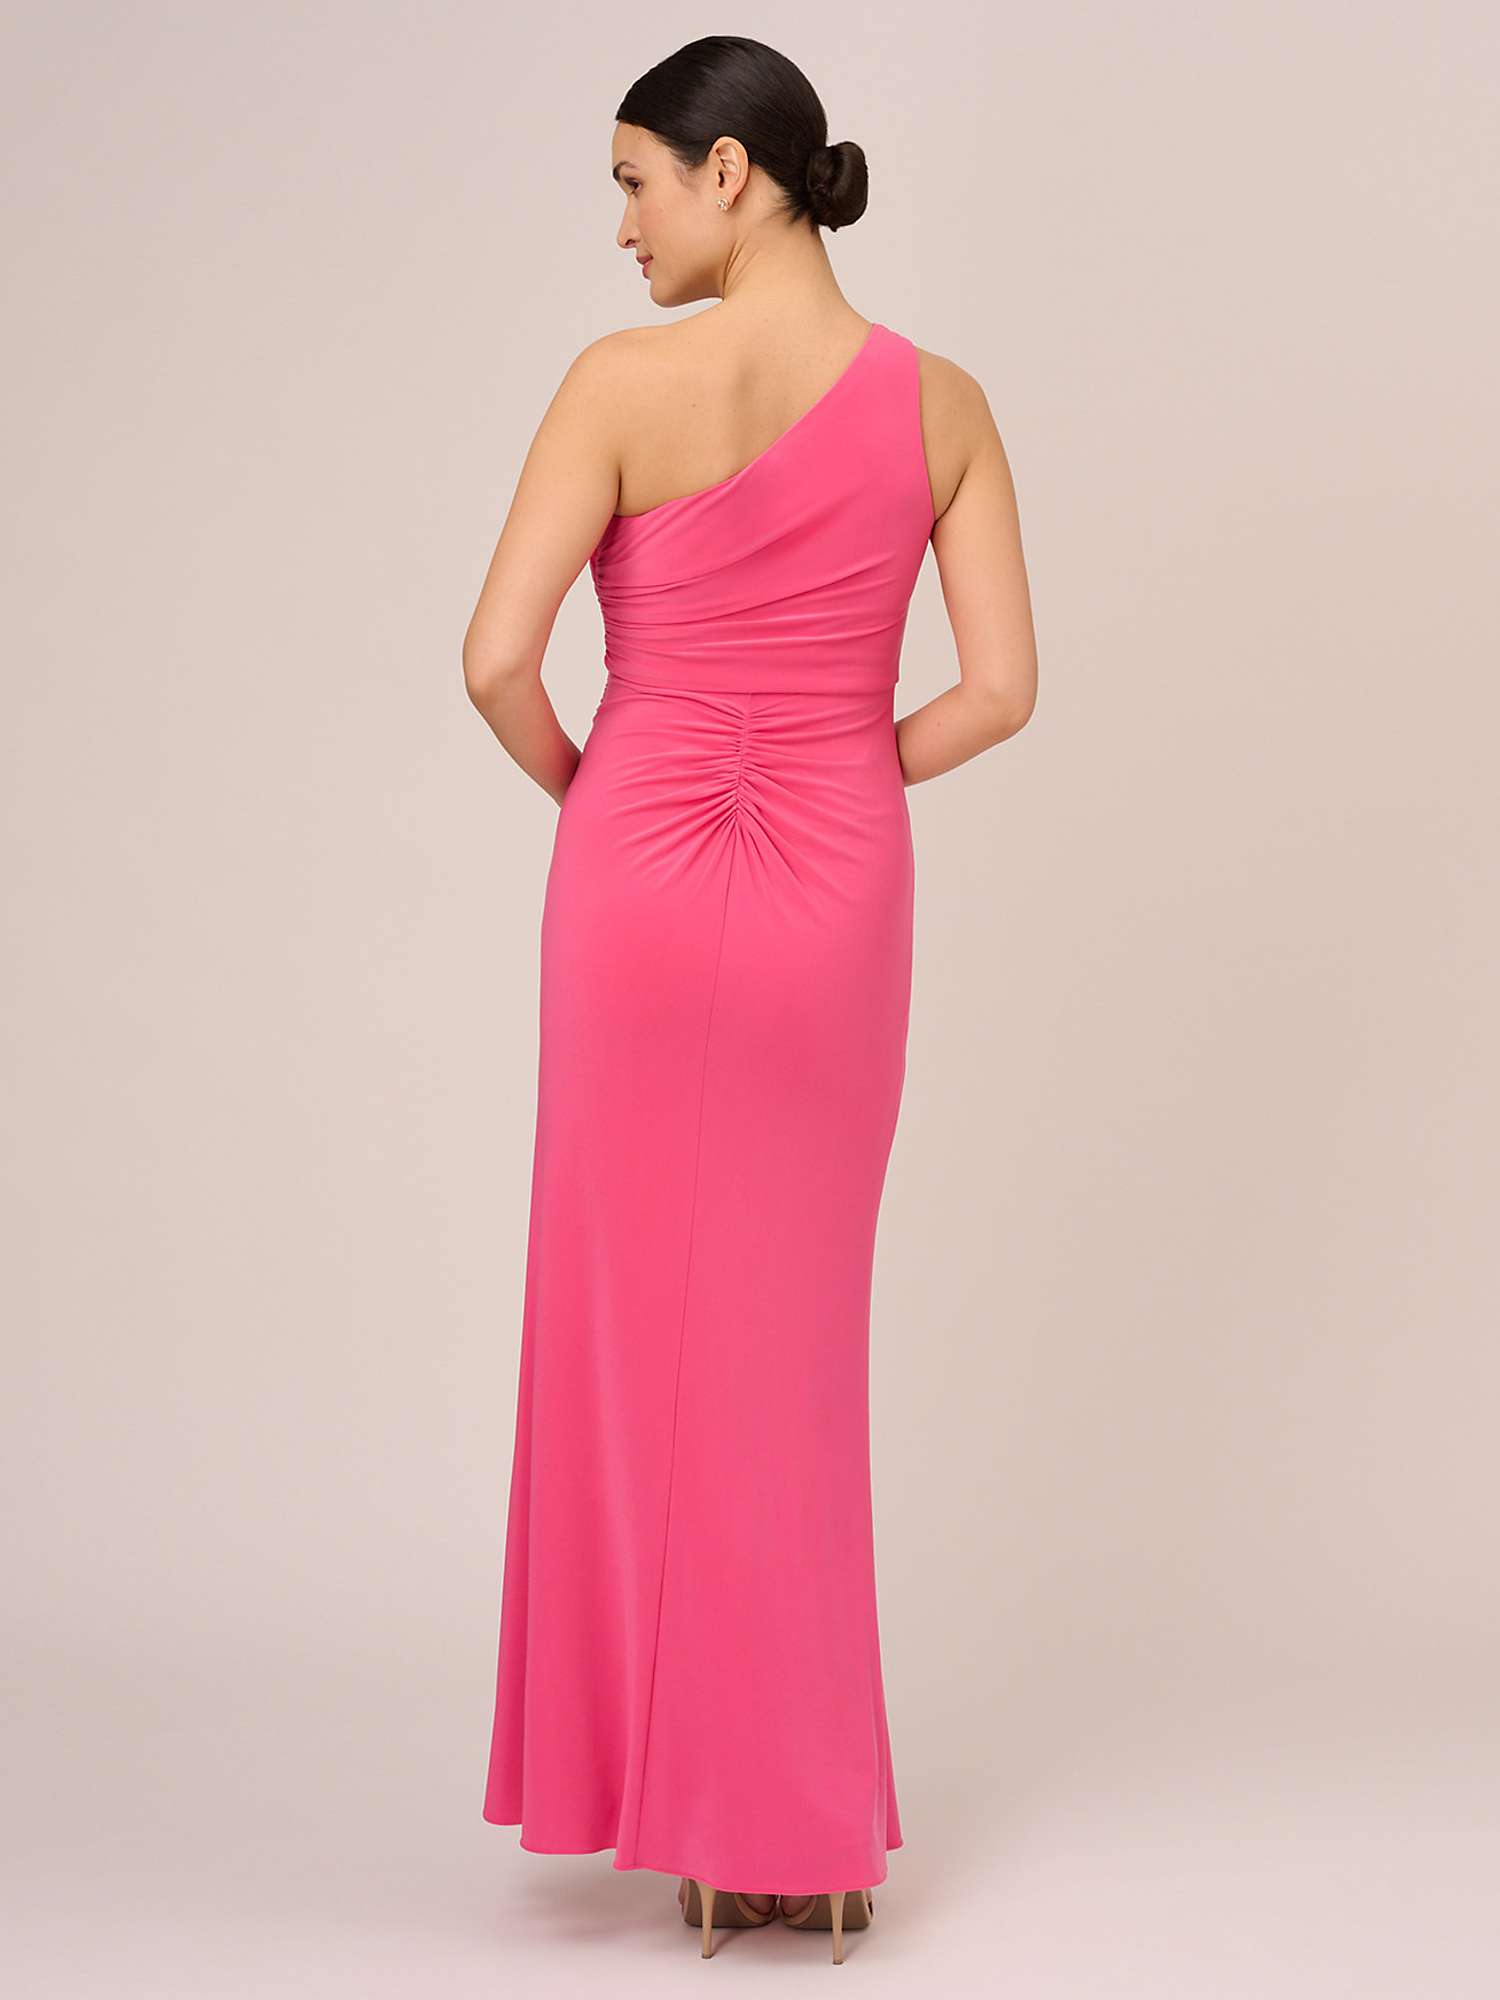 Buy Adrianna Papell One Shoulder Gown Dress, Pink Online at johnlewis.com